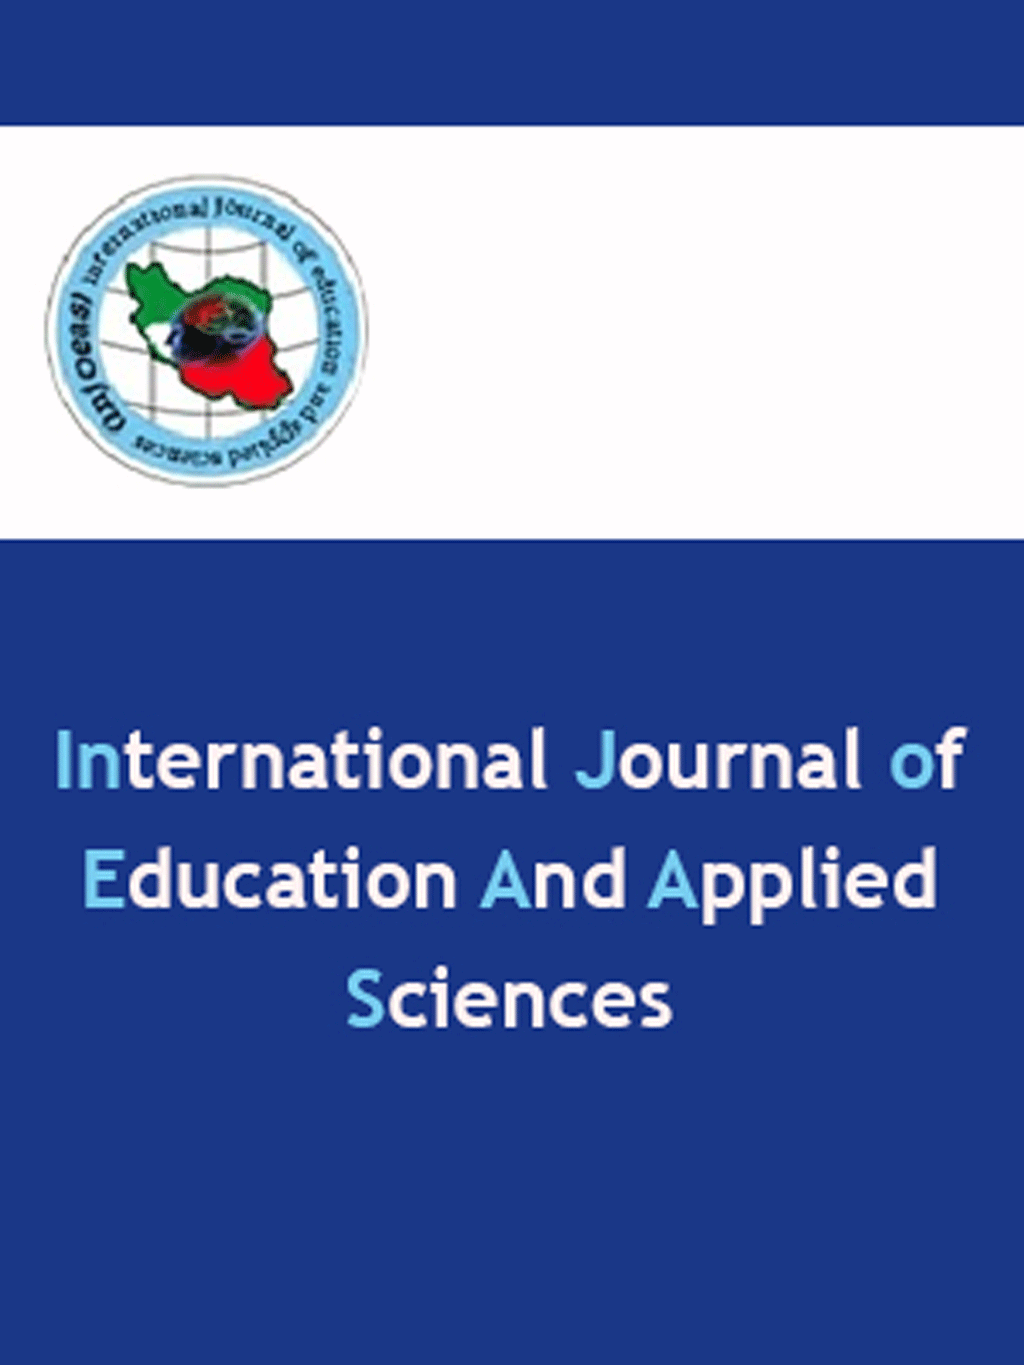 Education and Applied Sciences - October 2020, Volume 1 - Number 3